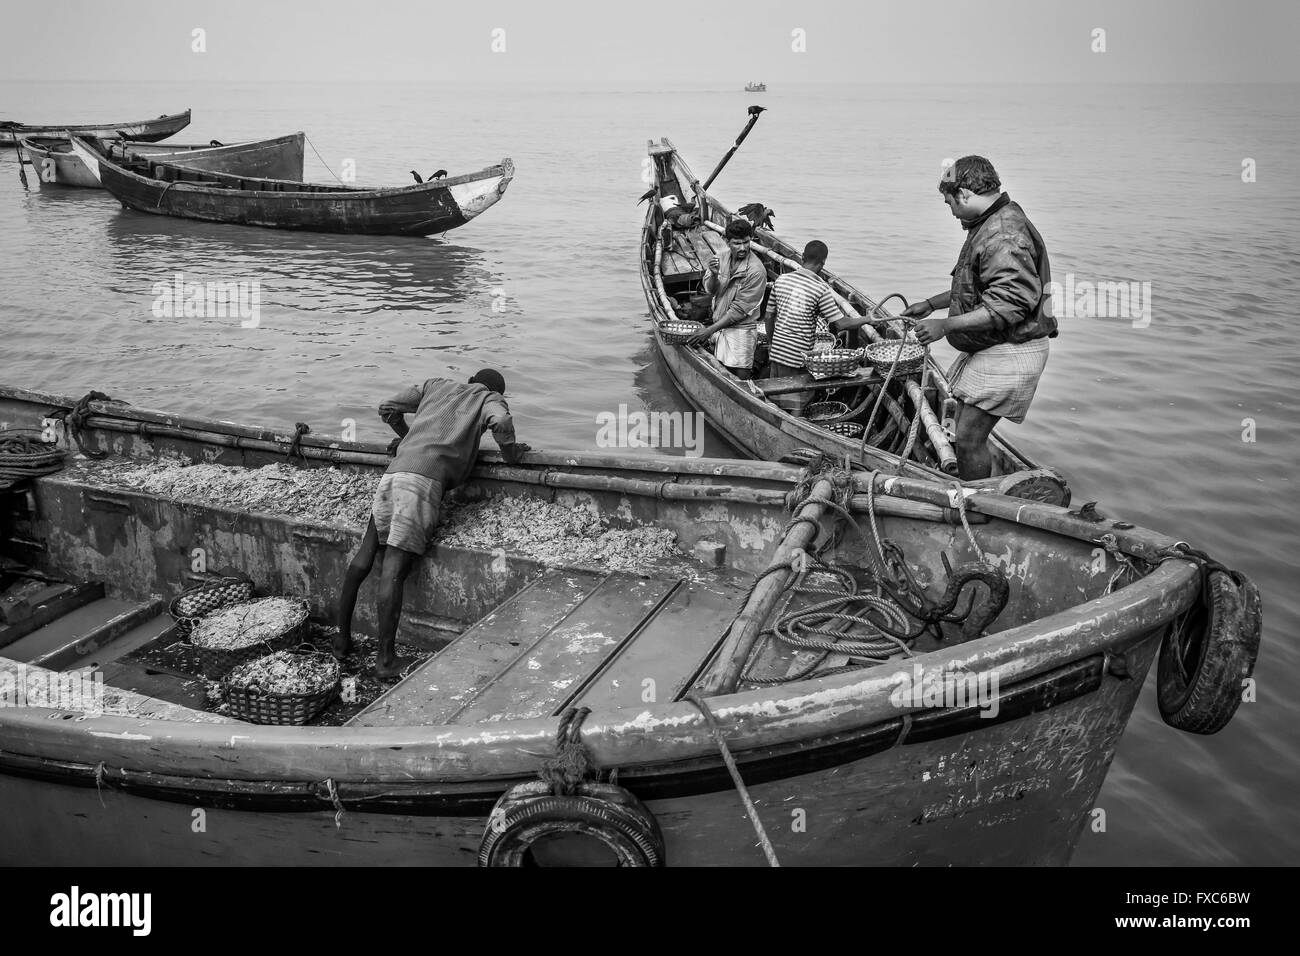 Fishermen collecting near the shibreaking yards of Chittagong in Bangladesh their freshly caught crabs. Every morning fishermen in Chittagong go with their boats to contaminated fishing spots in the middle of one of the largest shipbreaking places the world. Stock Photo